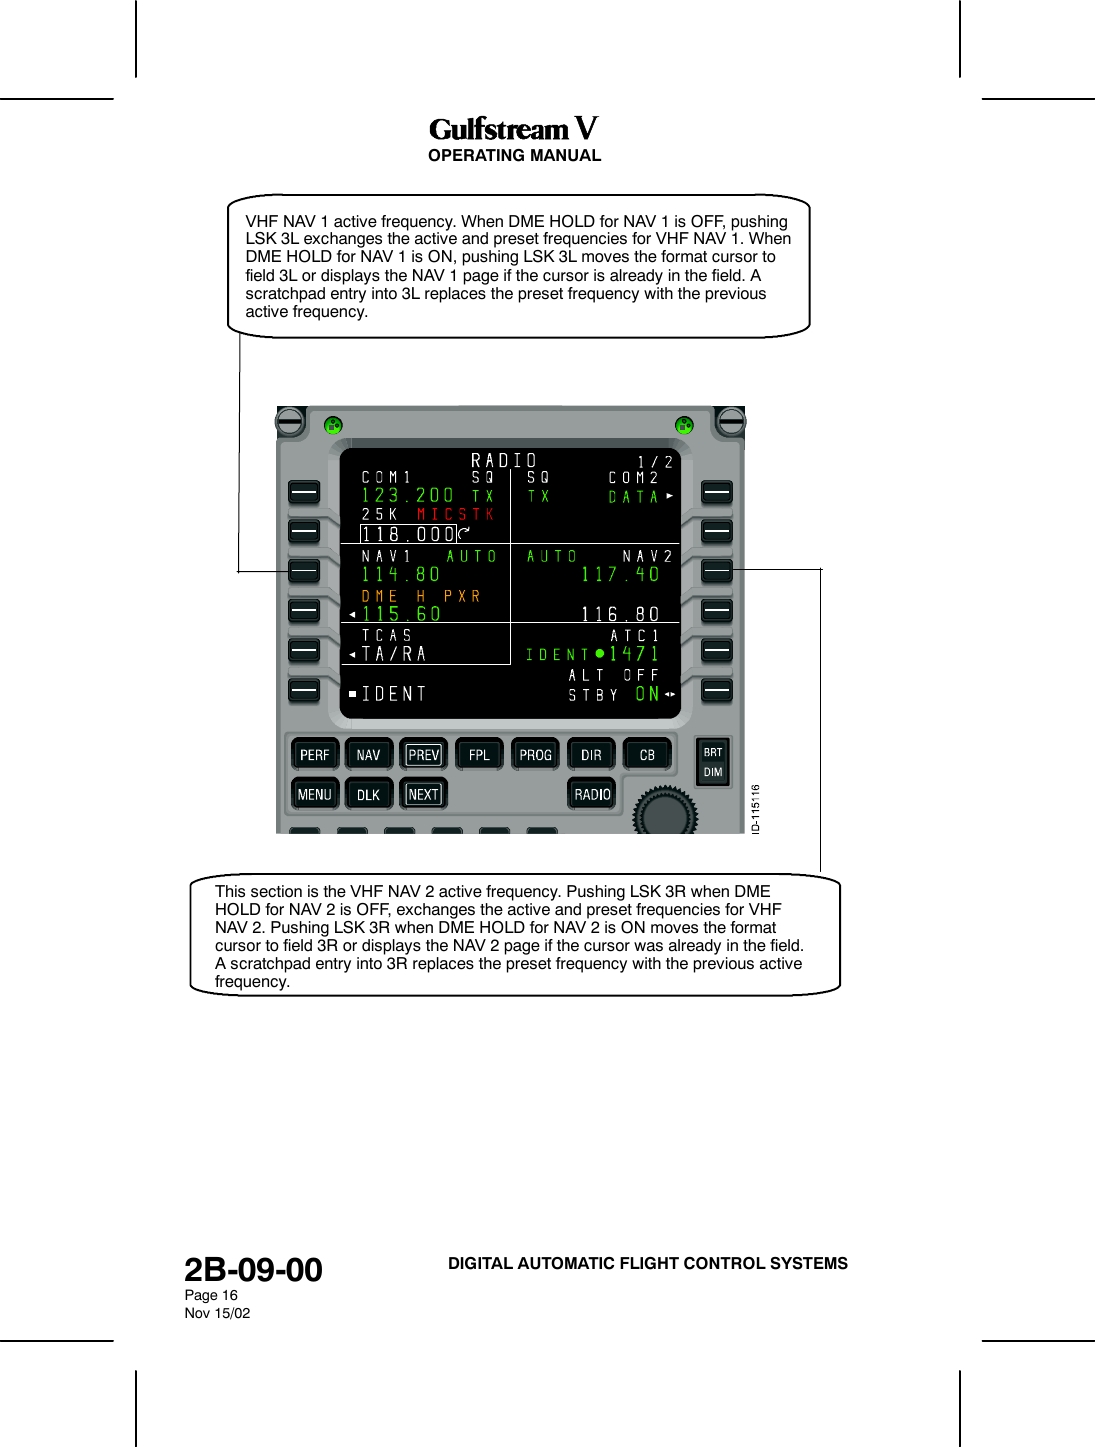 OPERATING MANUAL2B-09-00Page 16Nov 15/02DIGITAL AUTOMATIC FLIGHT CONTROL SYSTEMSVHF NAV 1 active frequency. When DME HOLD for NAV 1 is OFF, pushingLSK 3L exchanges the active and preset frequencies for VHF NAV 1. WhenDME HOLD for NAV 1 is ON, pushing LSK 3L moves the format cursor tofield 3L or displays the NAV 1 page if the cursor is already in the field. Ascratchpad entry into 3L replaces the preset frequency with the previousactive frequency.This section is the VHF NAV 2 active frequency. Pushing LSK 3R when DMEHOLD for NAV 2 is OFF, exchanges the active and preset frequencies for VHFNAV 2. Pushing LSK 3R when DME HOLD for NAV 2 is ON moves the formatcursor to field 3R or displays the NAV 2 page if the cursor was already in the field.A scratchpad entry into 3R replaces the preset frequency with the previous activefrequency.